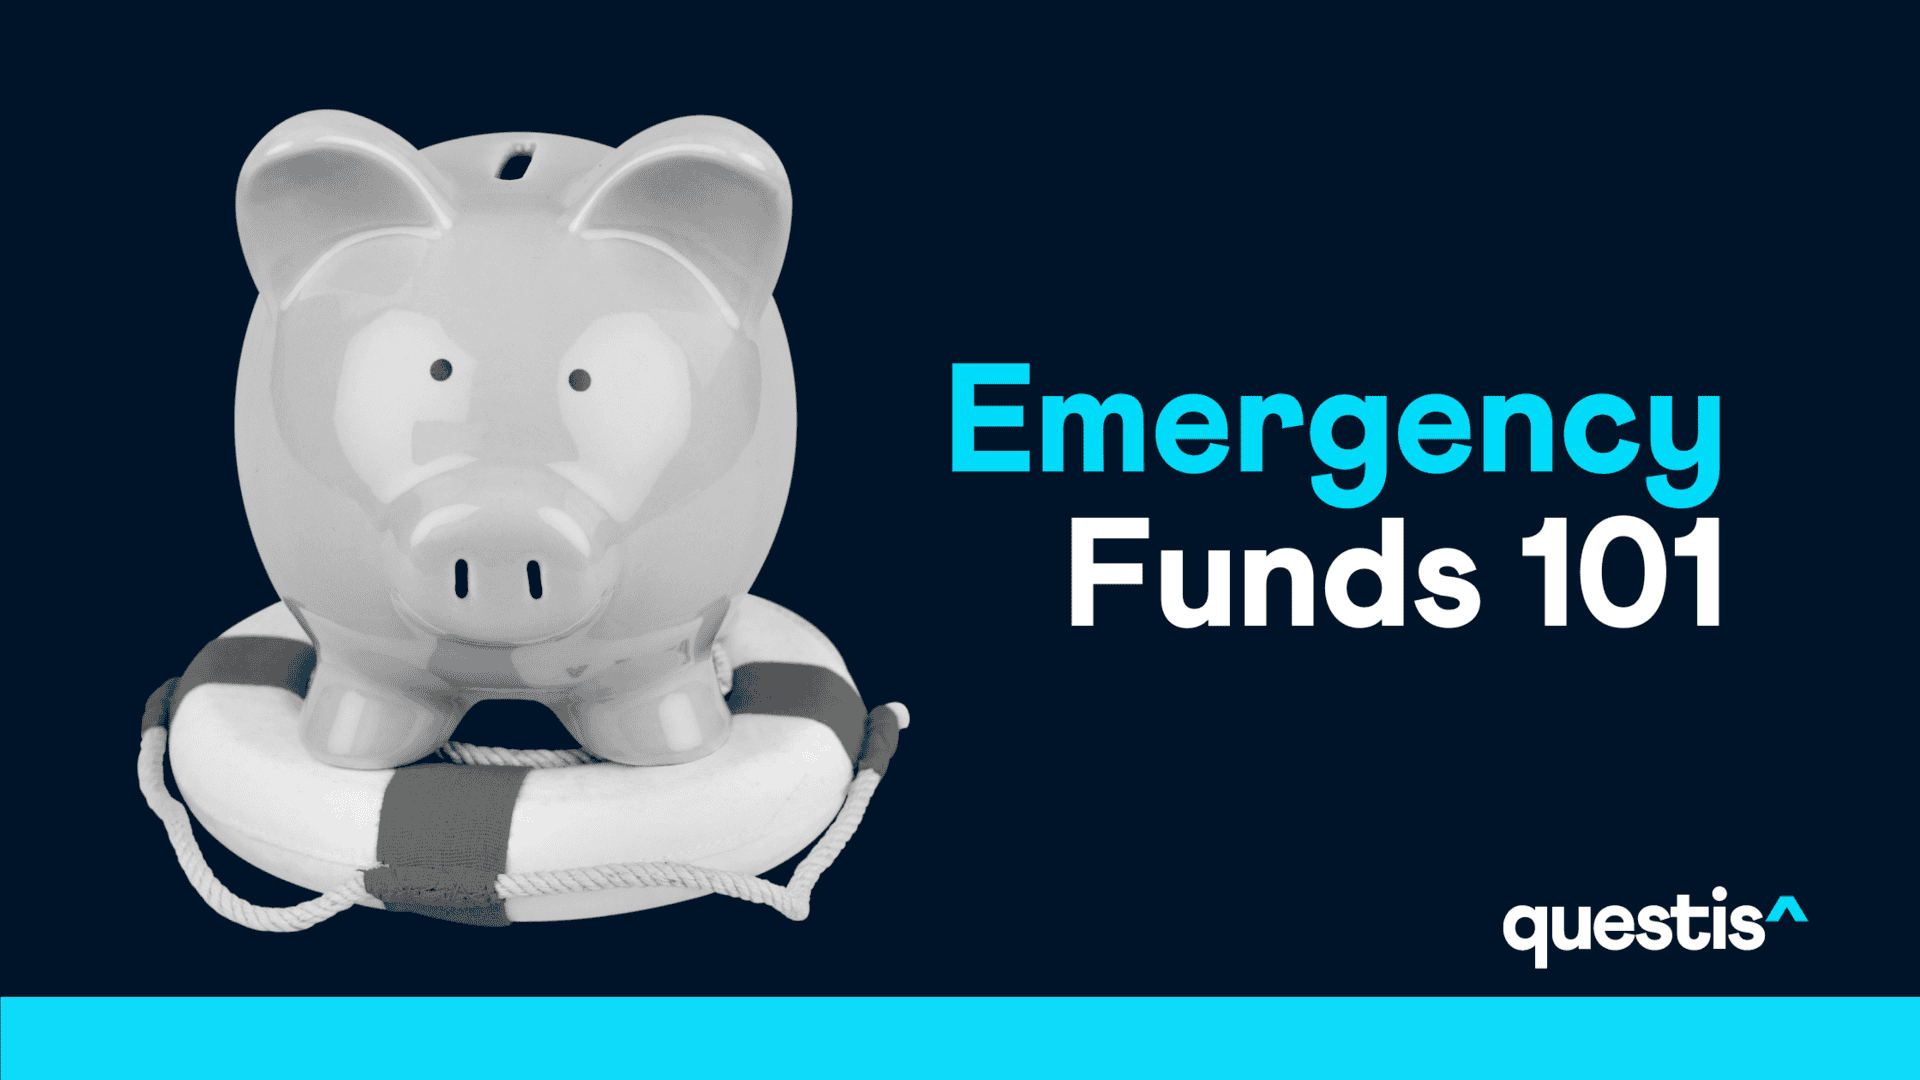 Emergency Funds 101